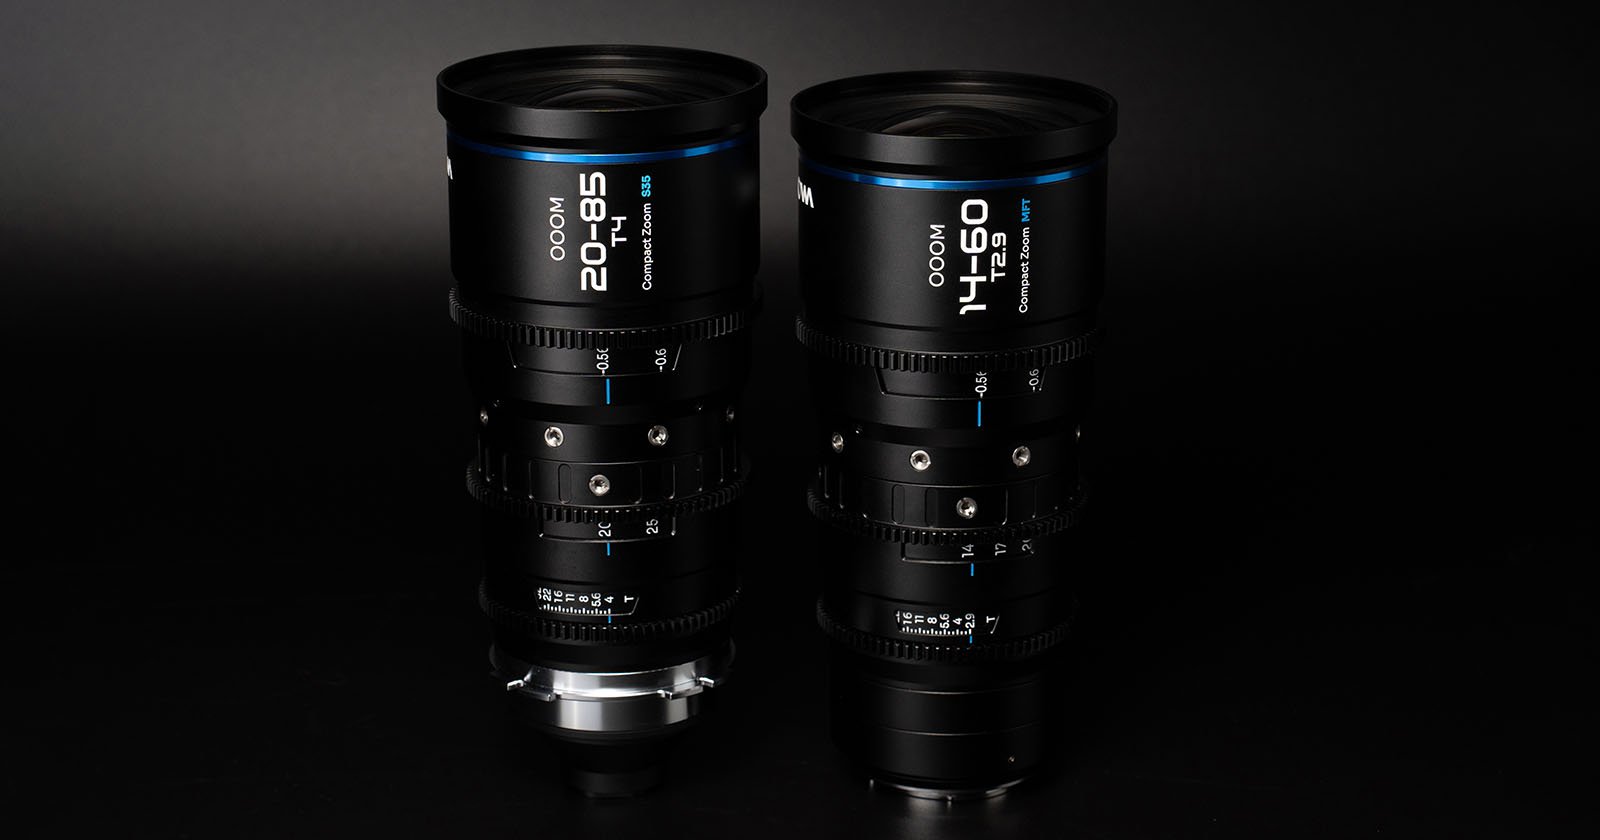 Laowa’s Two New Compact OOOM Cine Zoom Lenses Cost Under $2,000